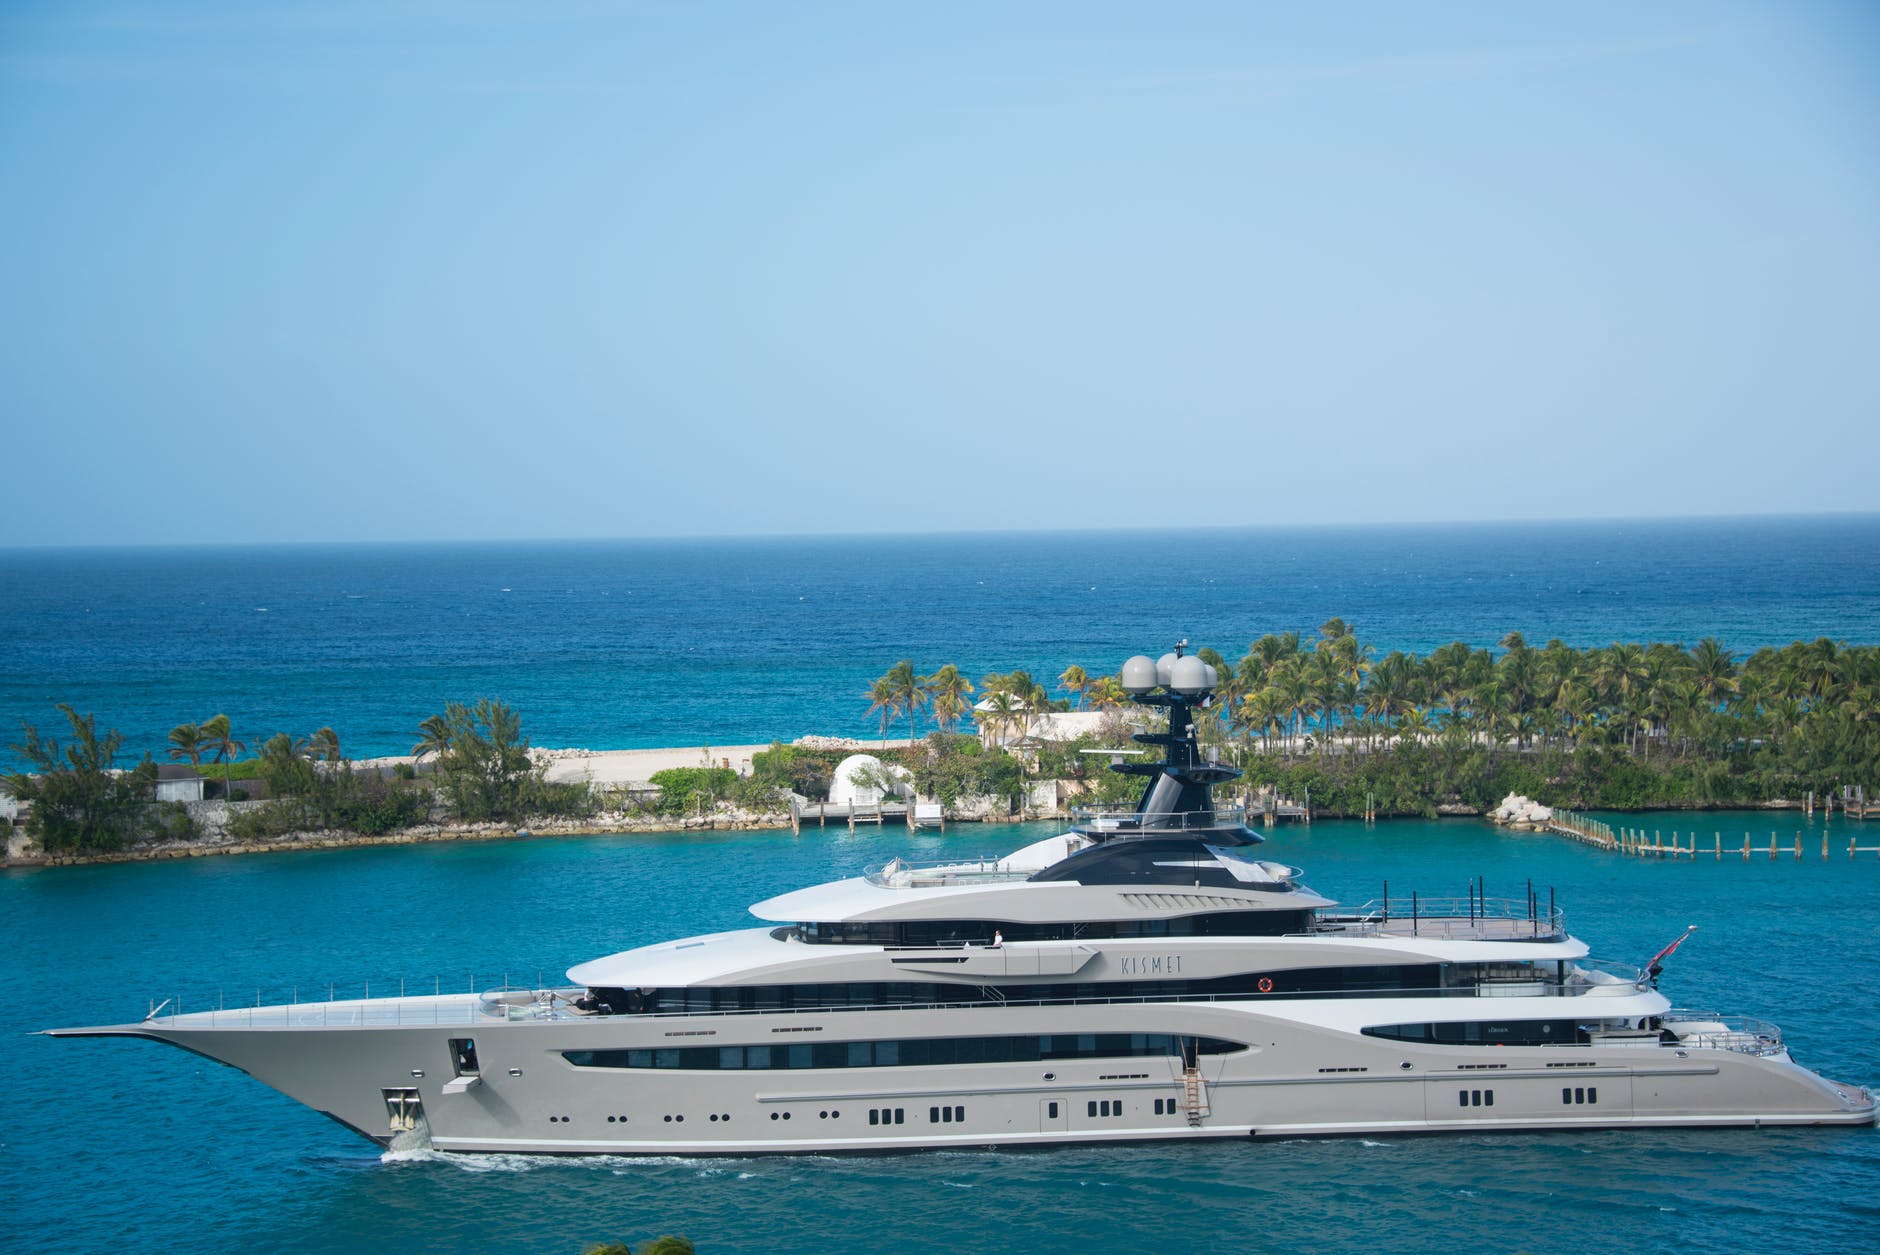 A superyacht sailing past a sandbank with palm trees